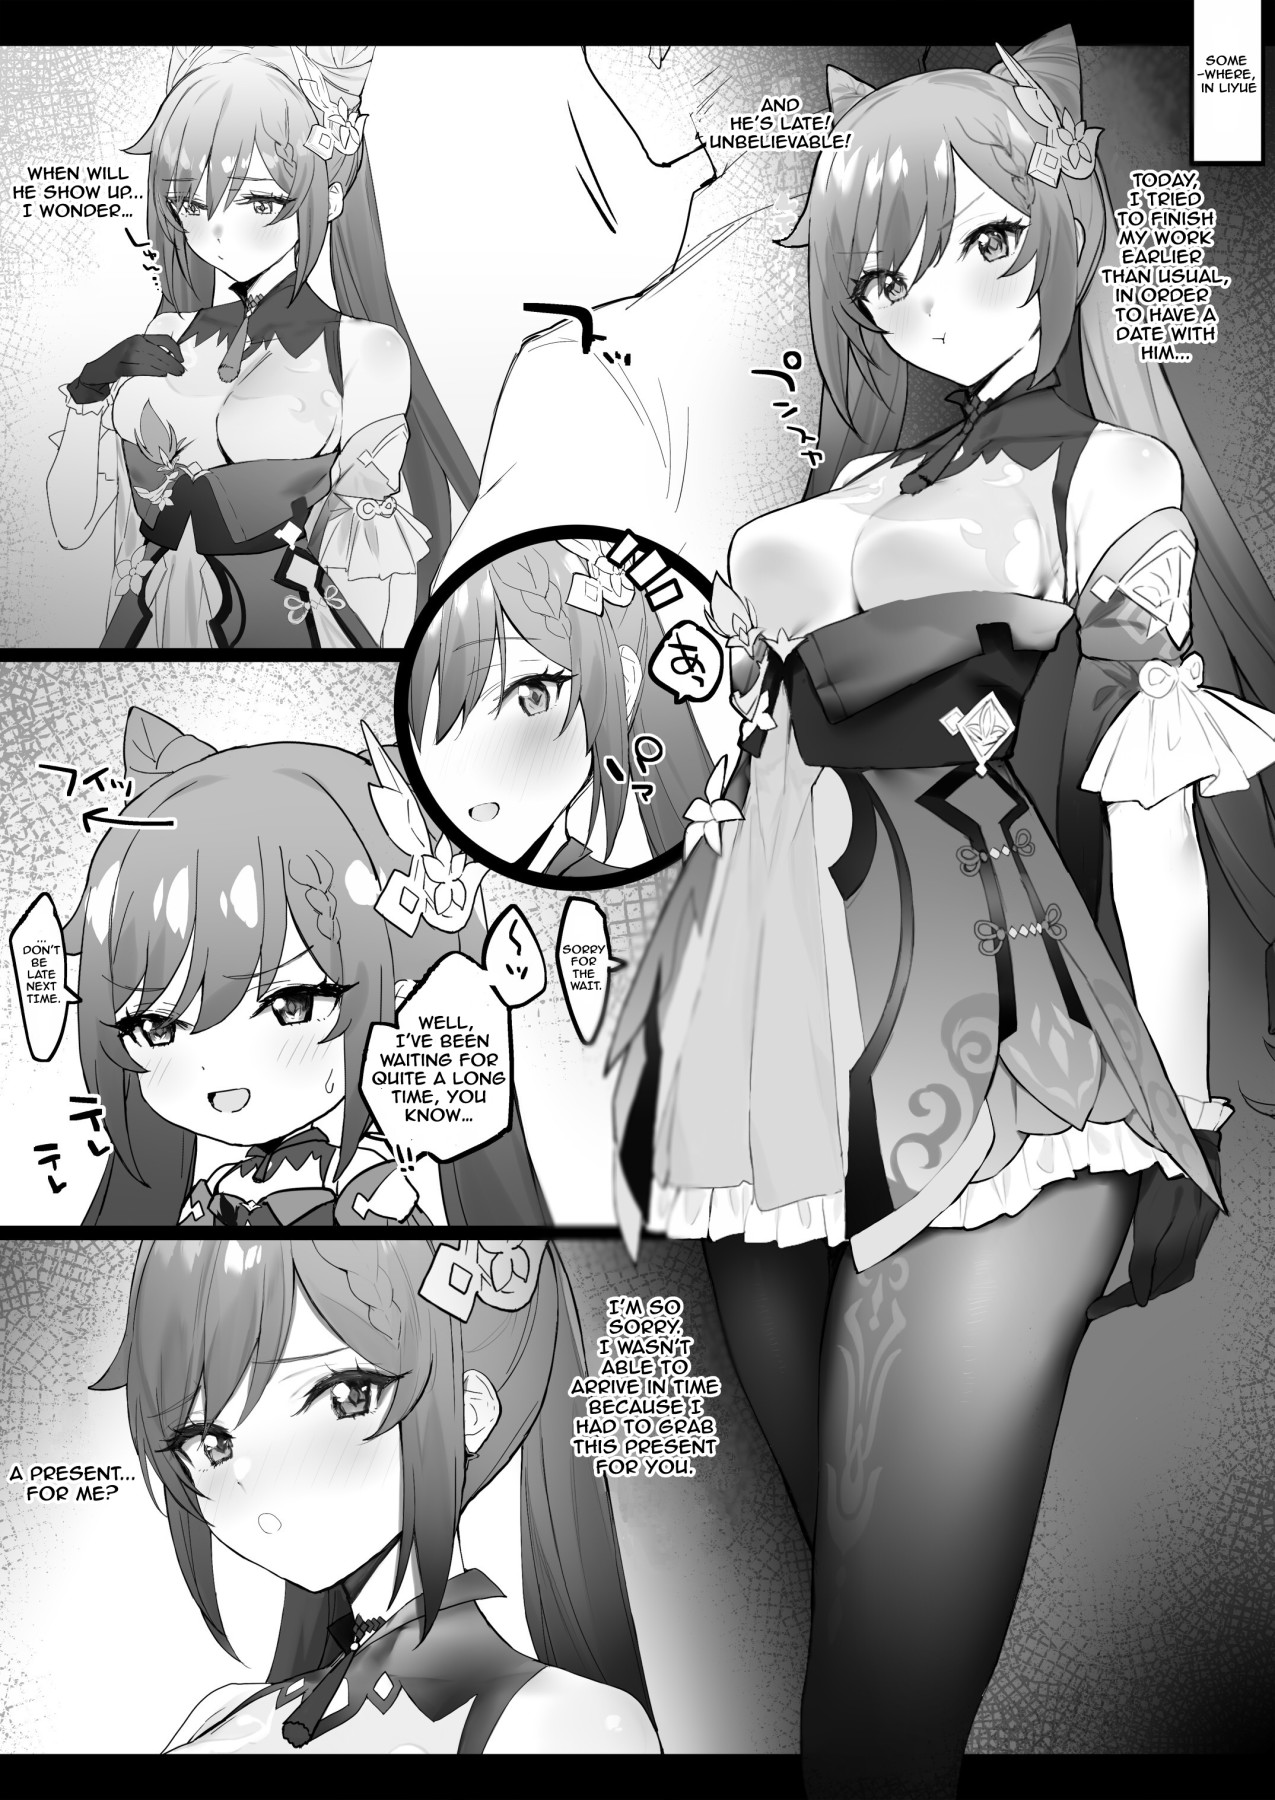 Hentai Manga Comic-Keqing-chan Lovey-Dovey After Working Time-Read-1